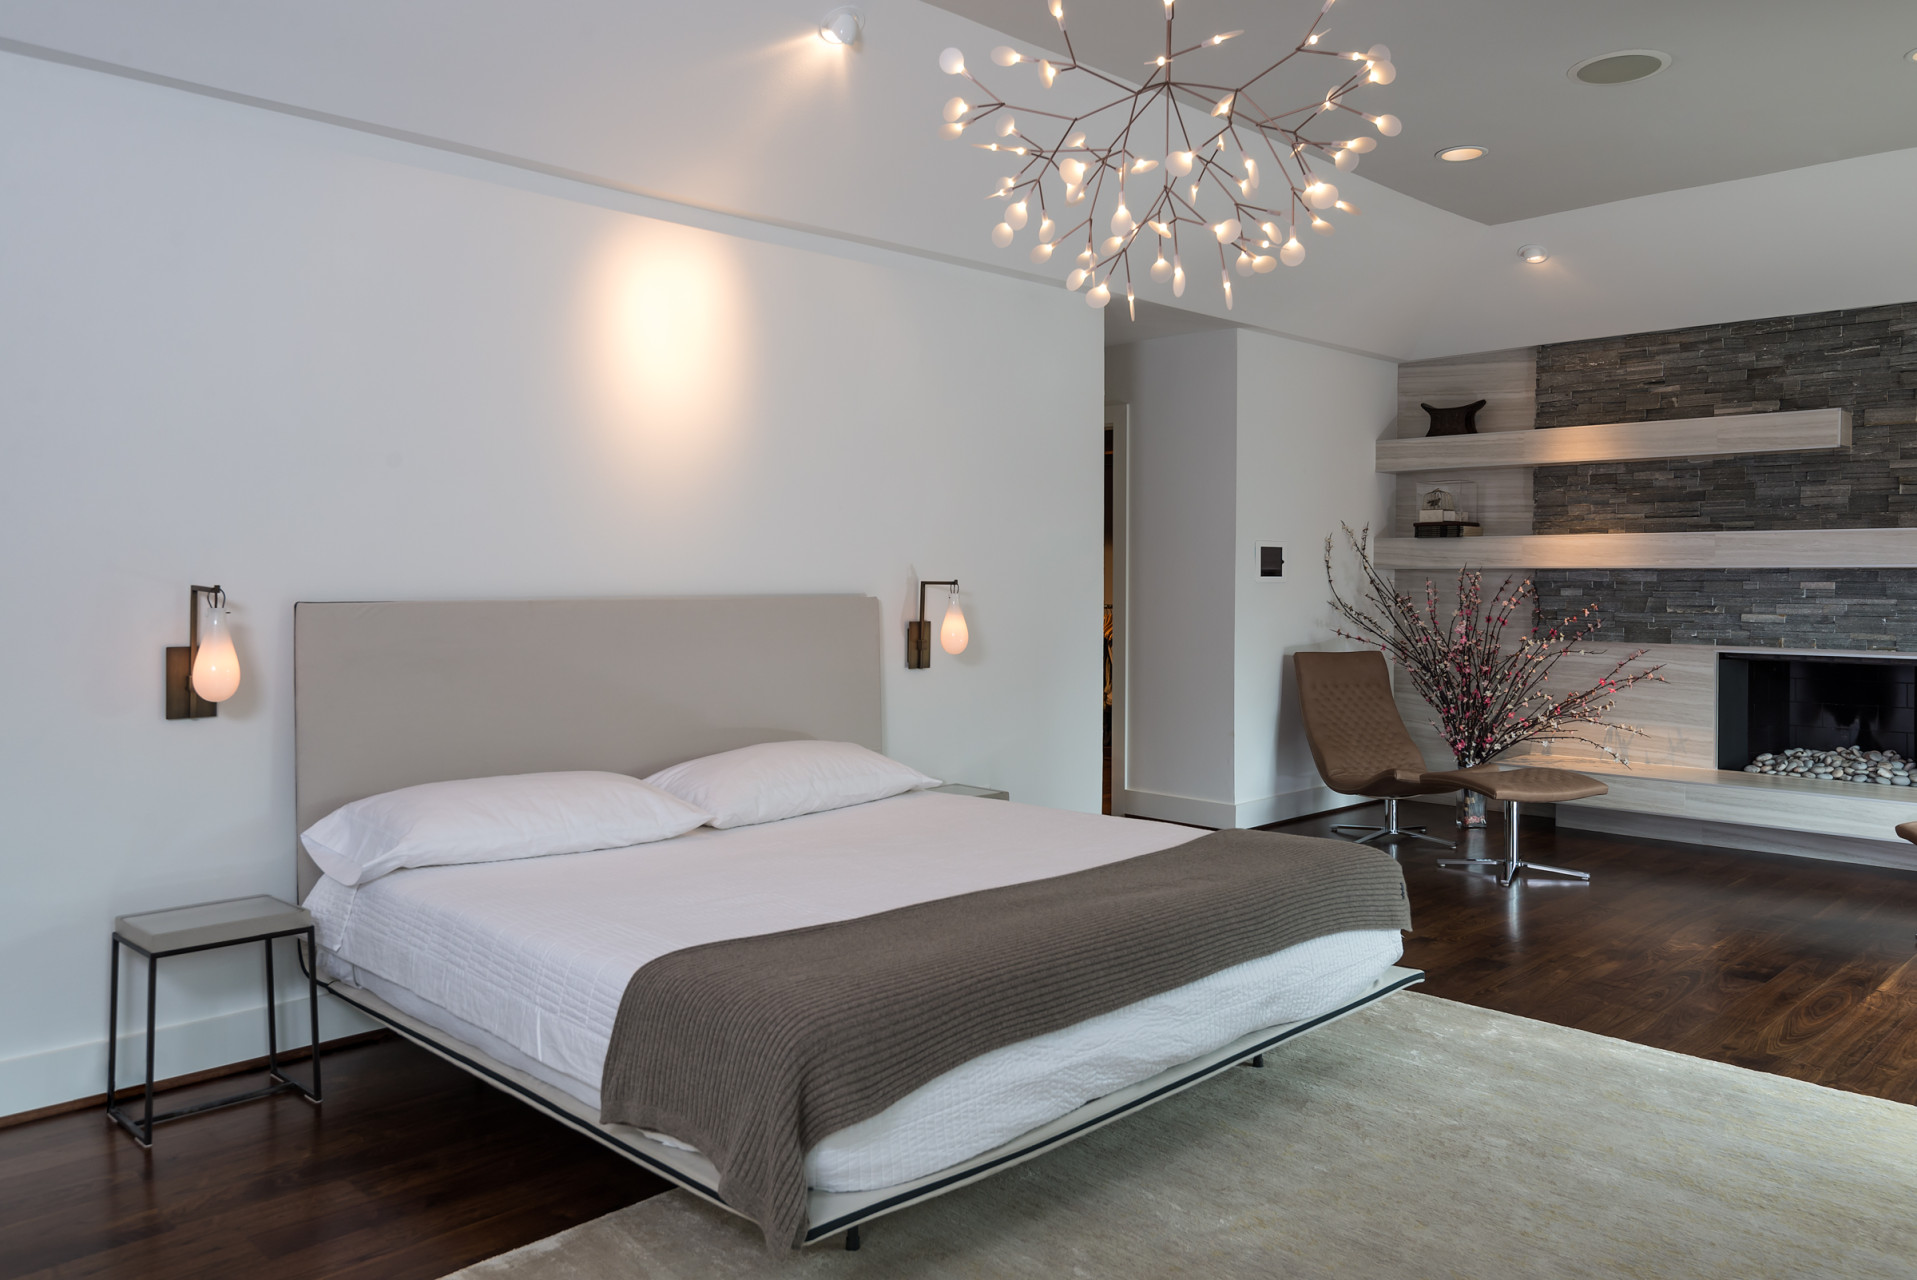 Heracleum II LED Chandelier by Bertjan Pot above a bed.